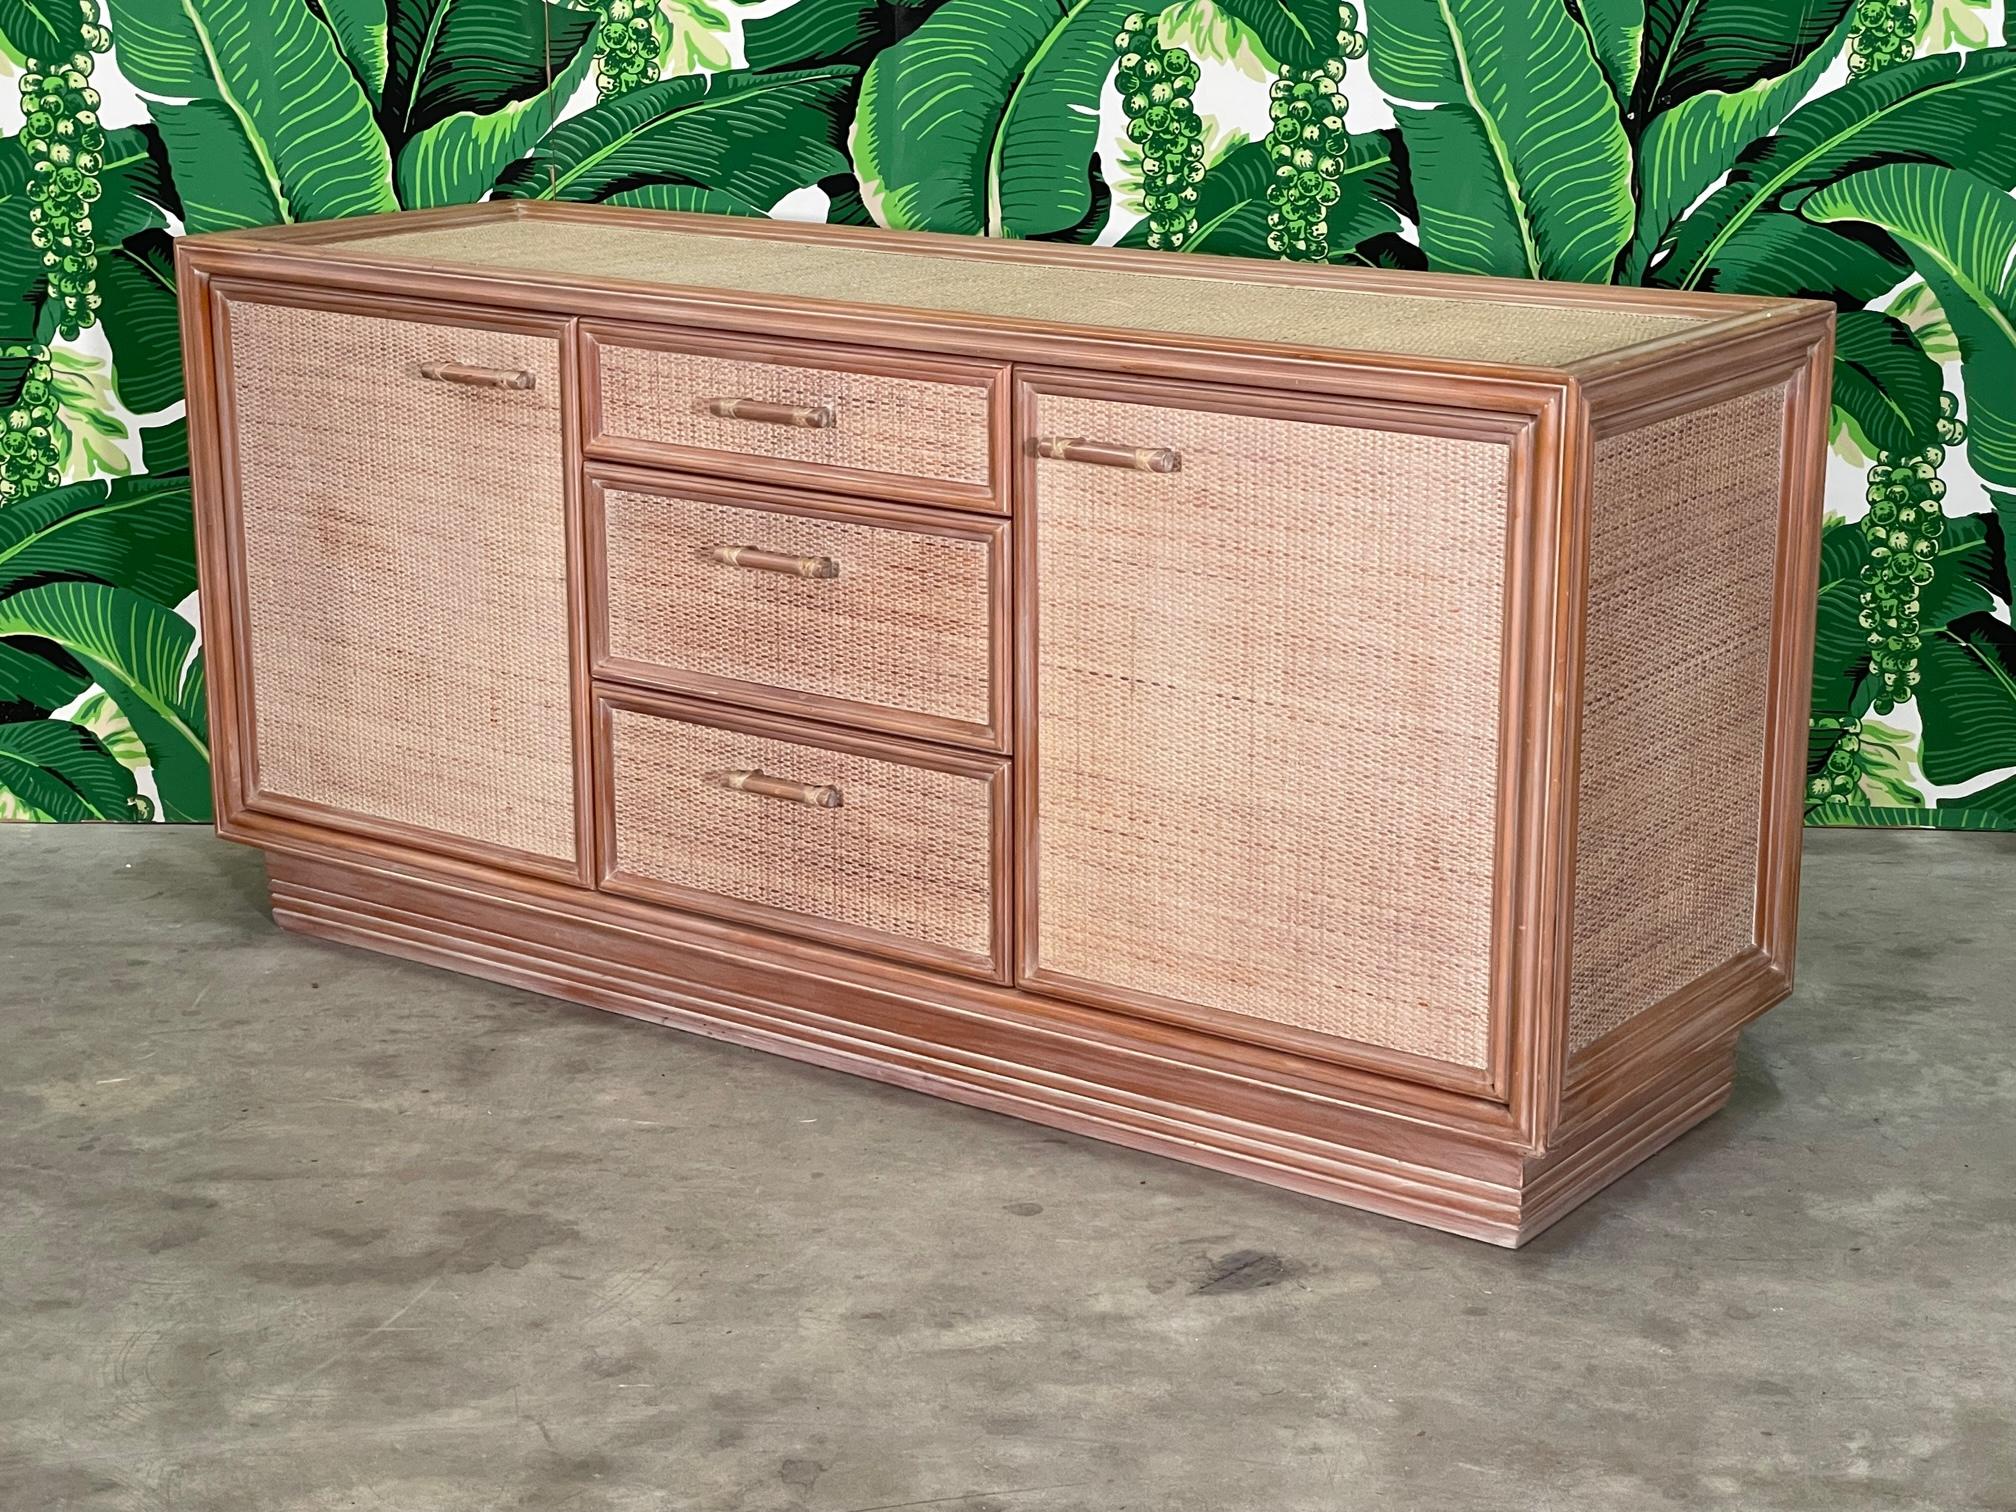 Rattan and wicker sideboard could be used as credenza or dresser. No maker's mark but similar to pieces made by Guire. Marked 